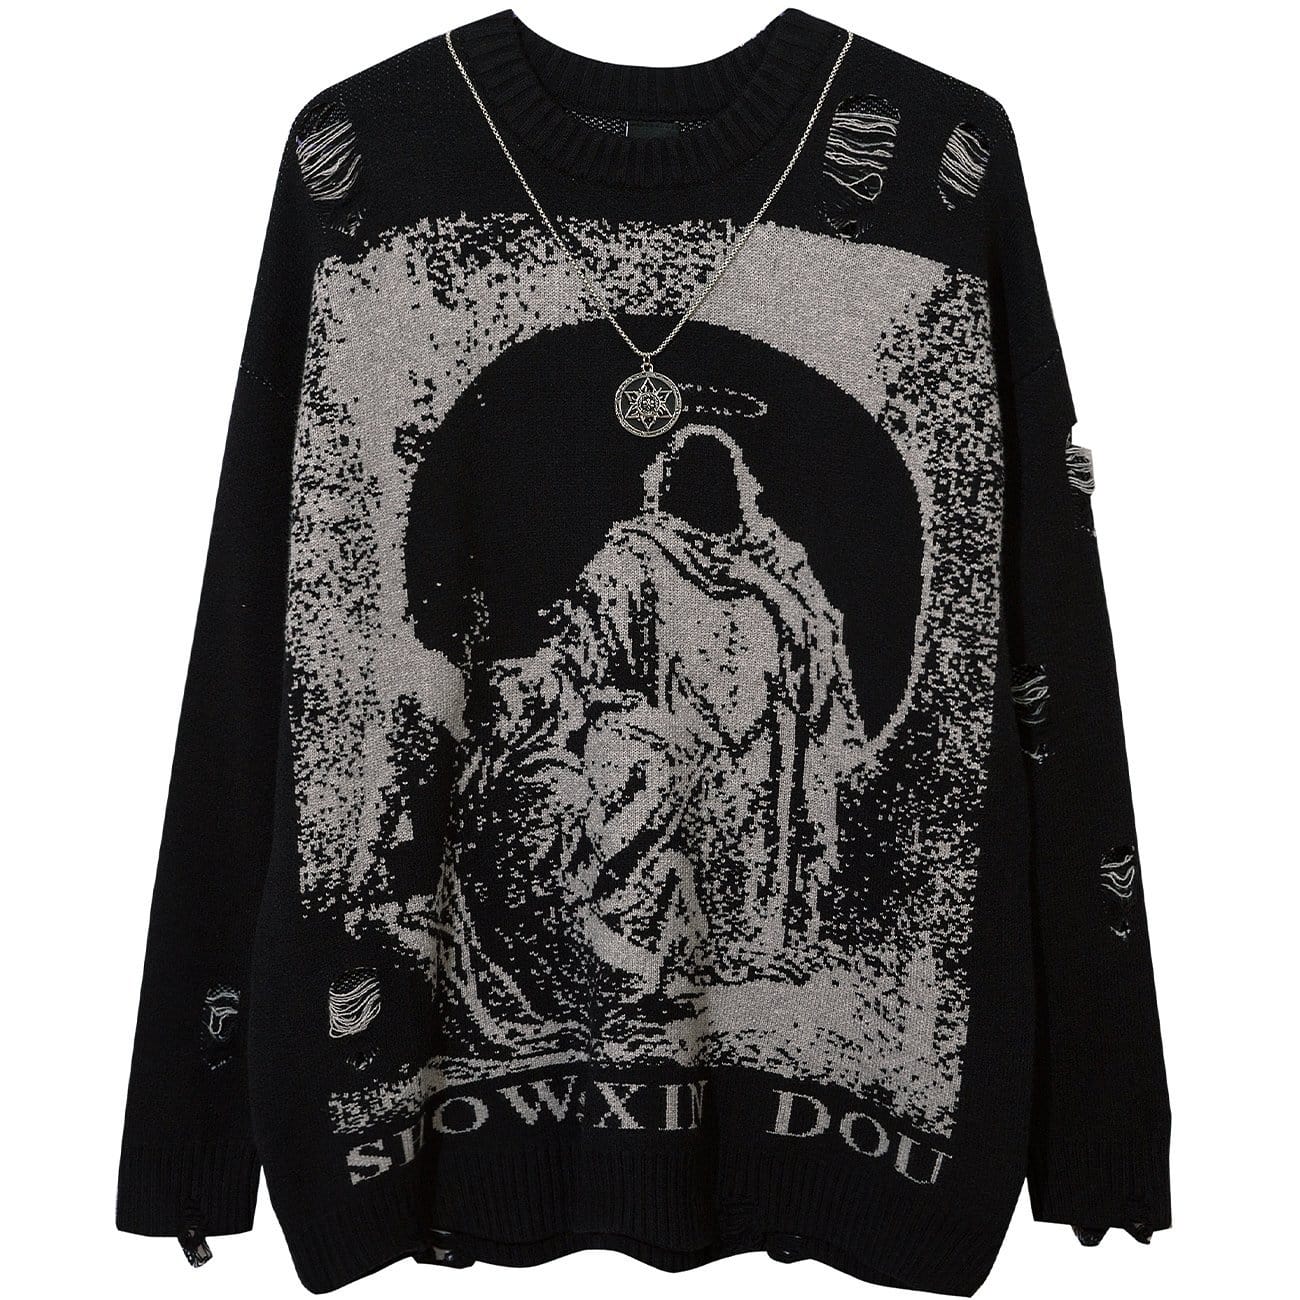 WLS Ripped Hole with Chain Knit Sweater